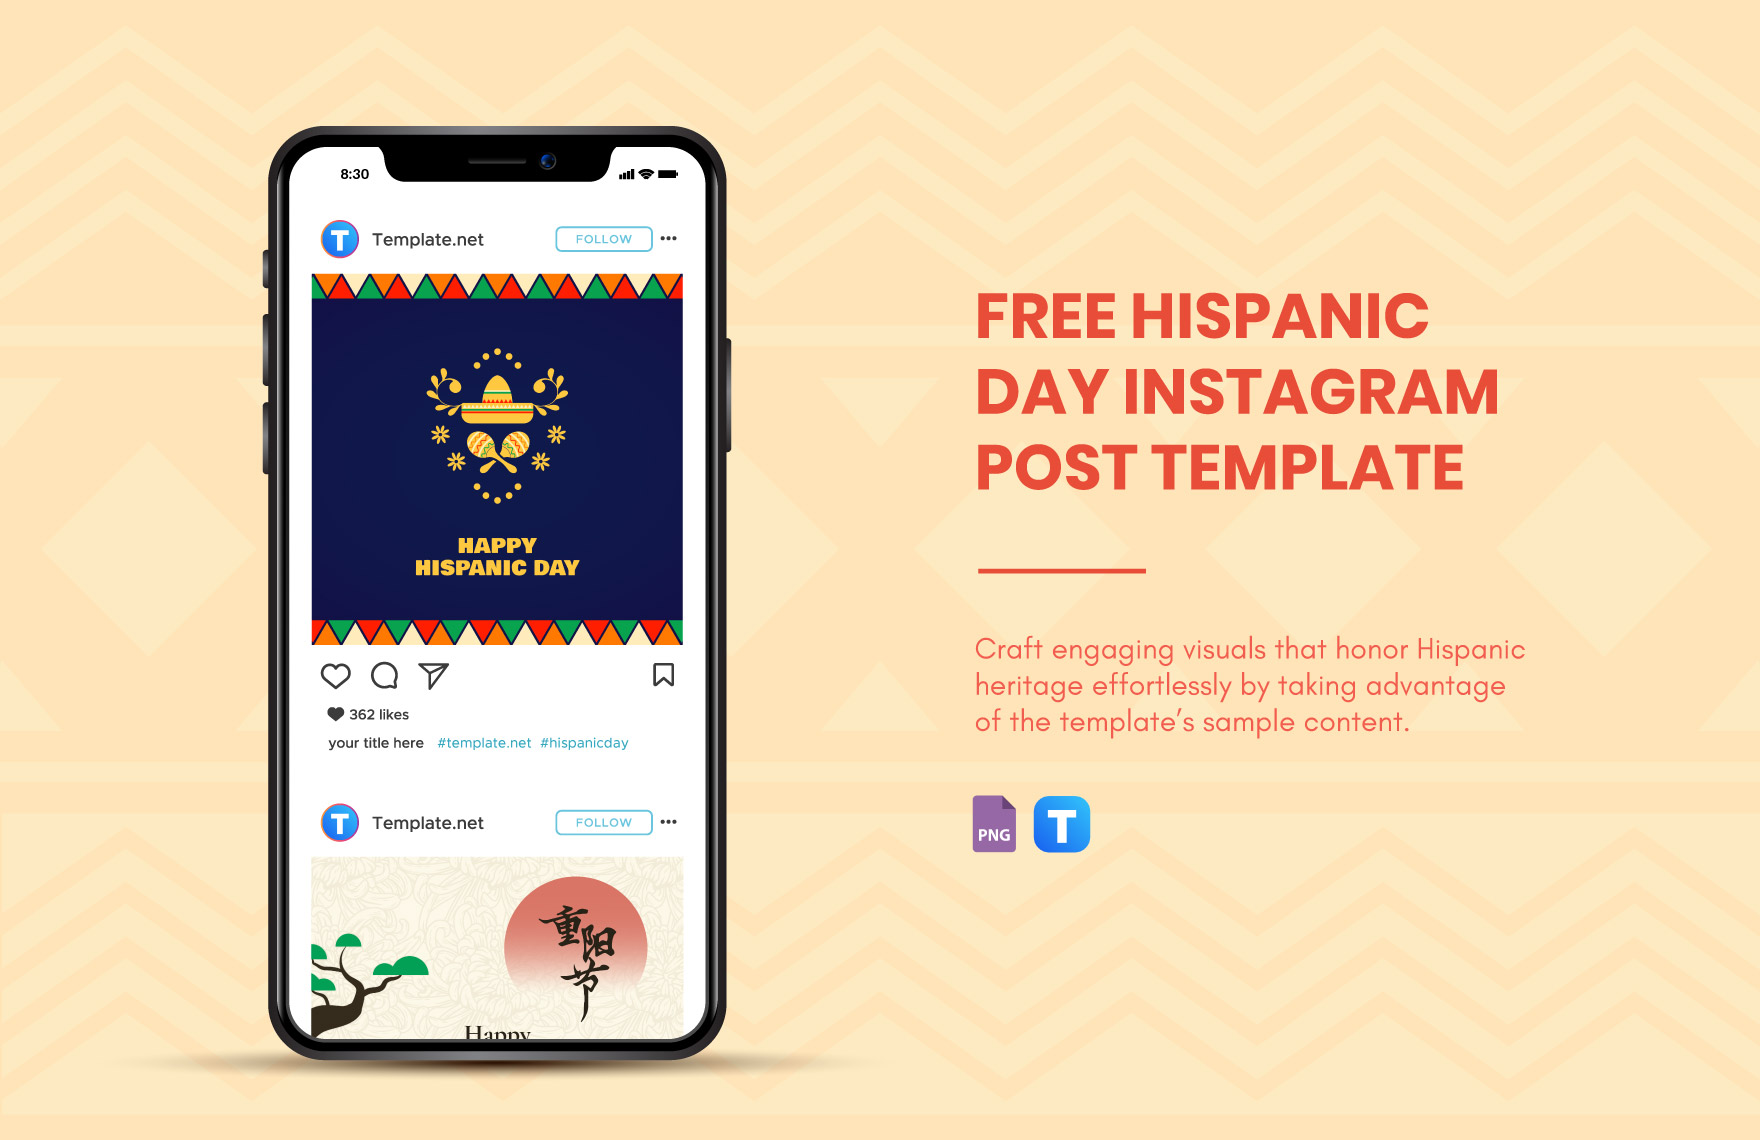 Free Hispanic Day Instagram Post Template in PNG